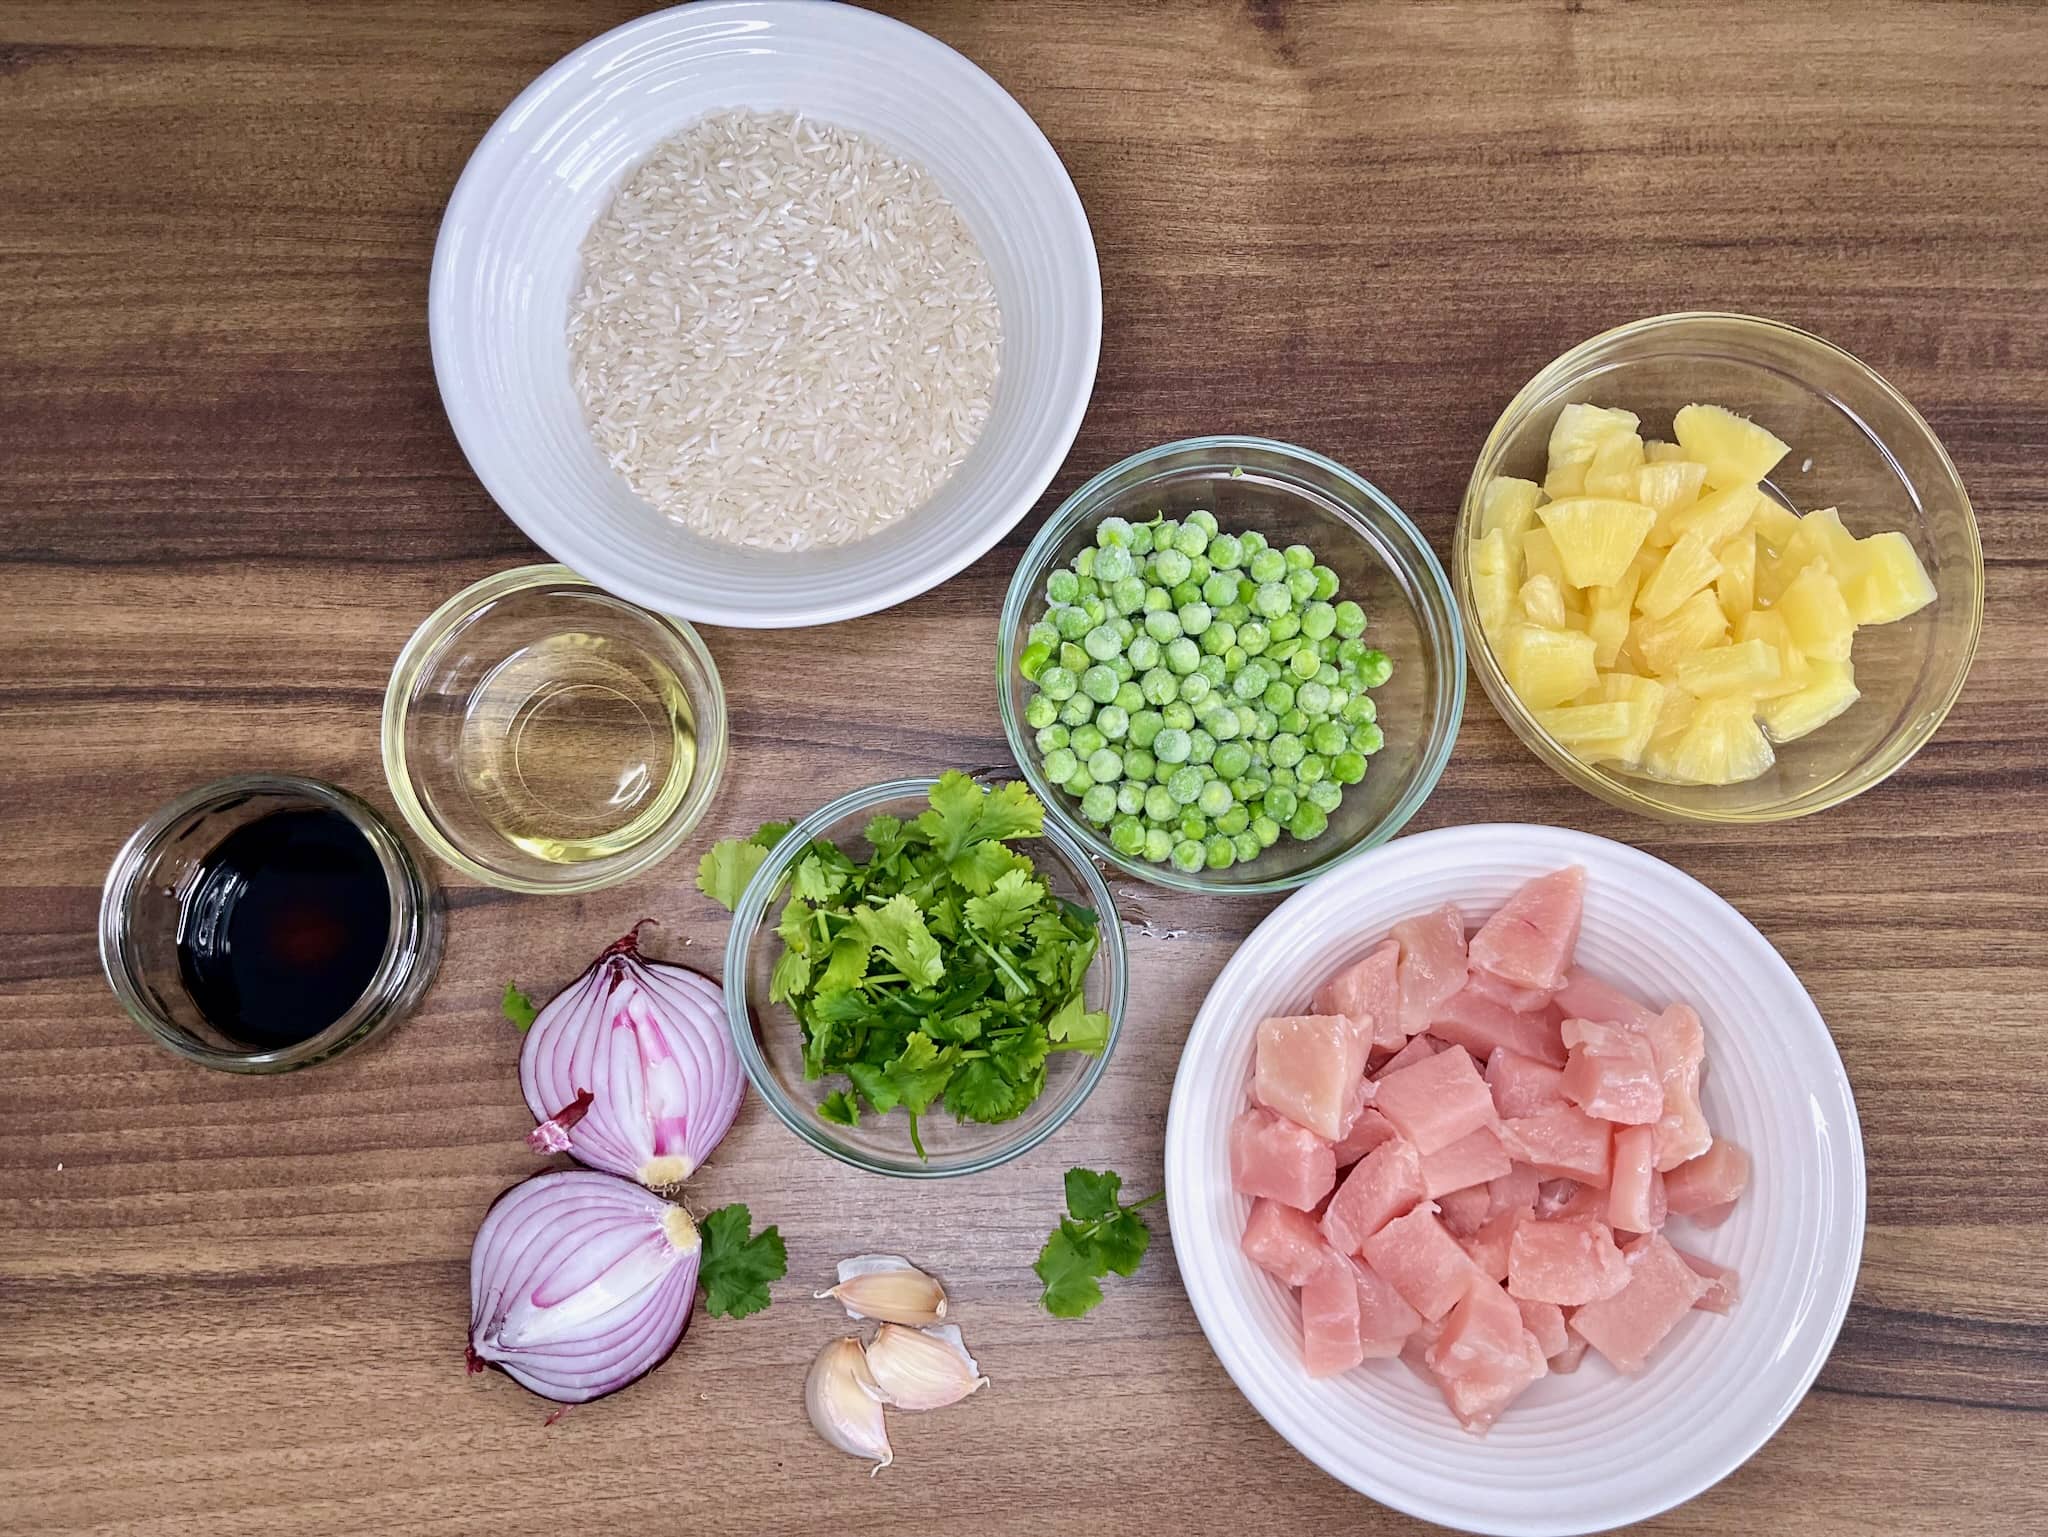 All the ingredients are on the tabletop, ready to be used to make Chicken and Pineapple Fried Rice